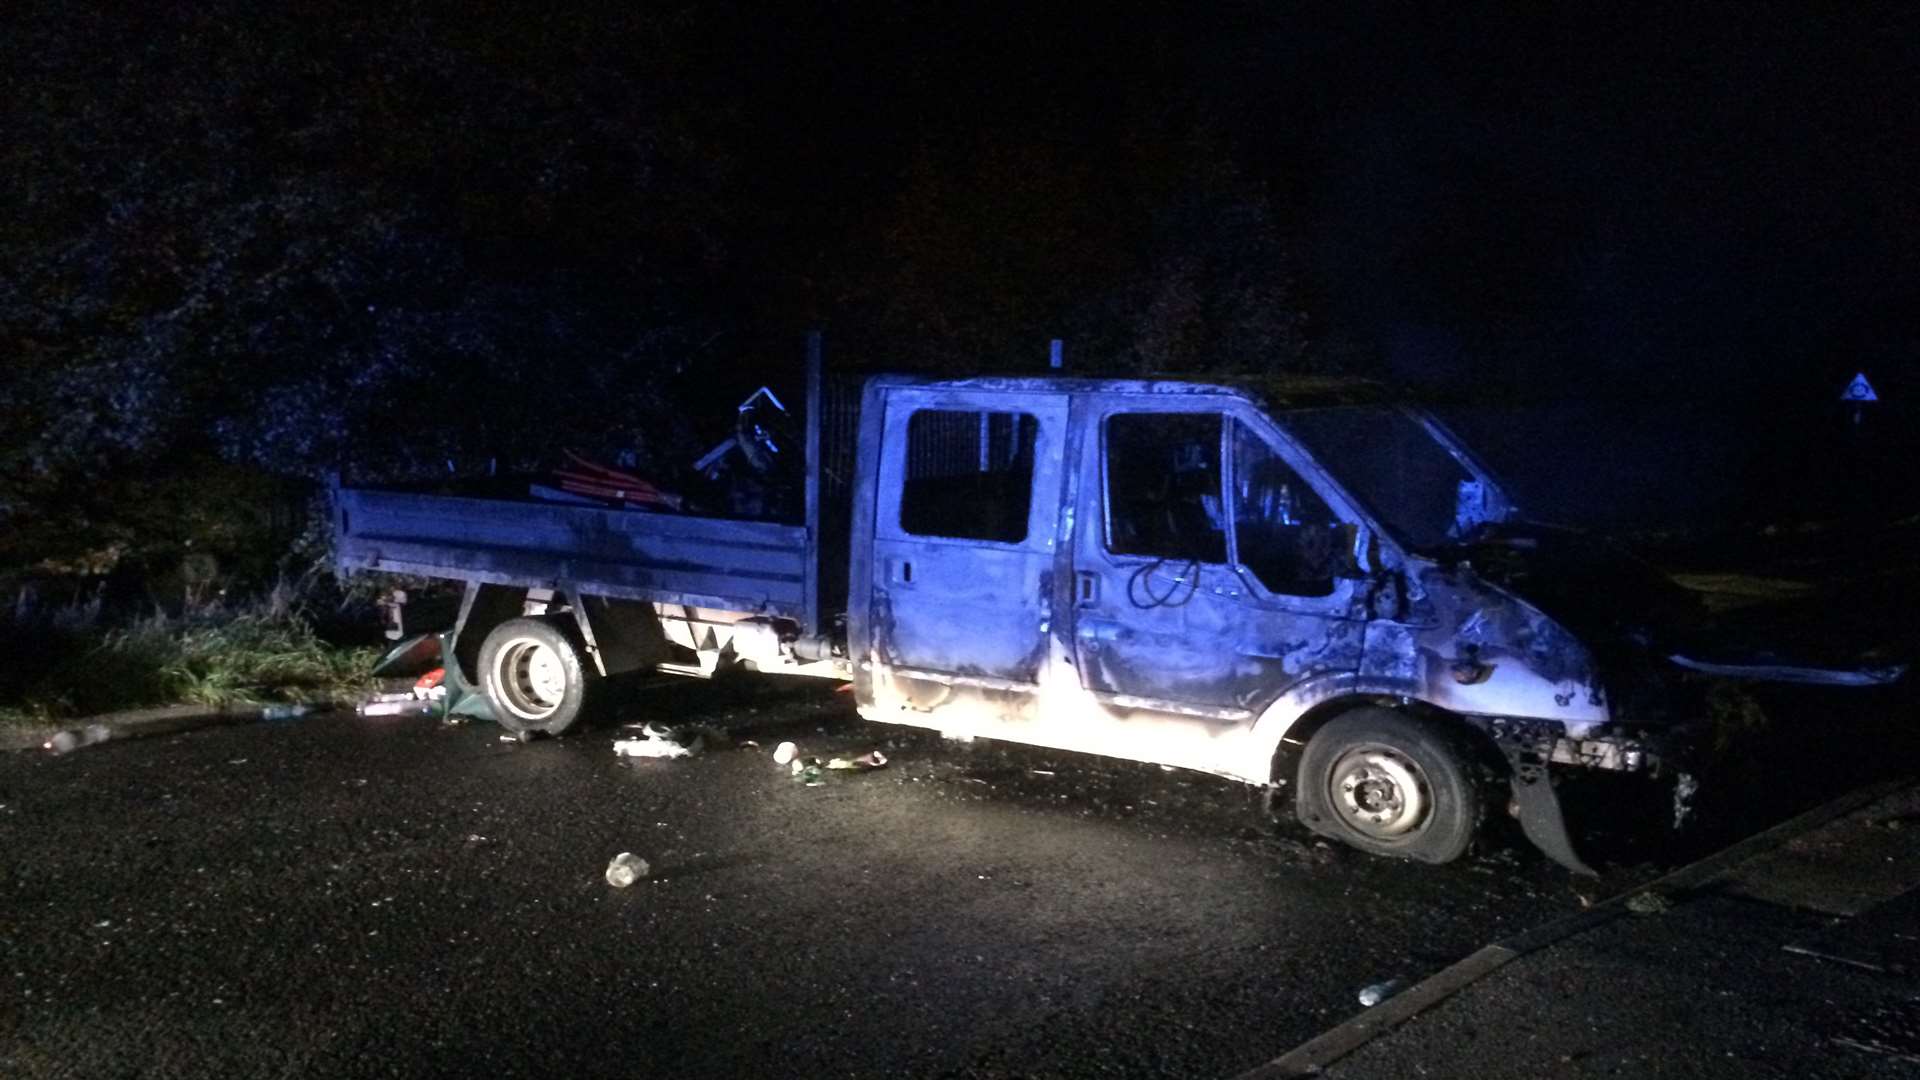 The fireball van rolled off the driveway and 'exploded'